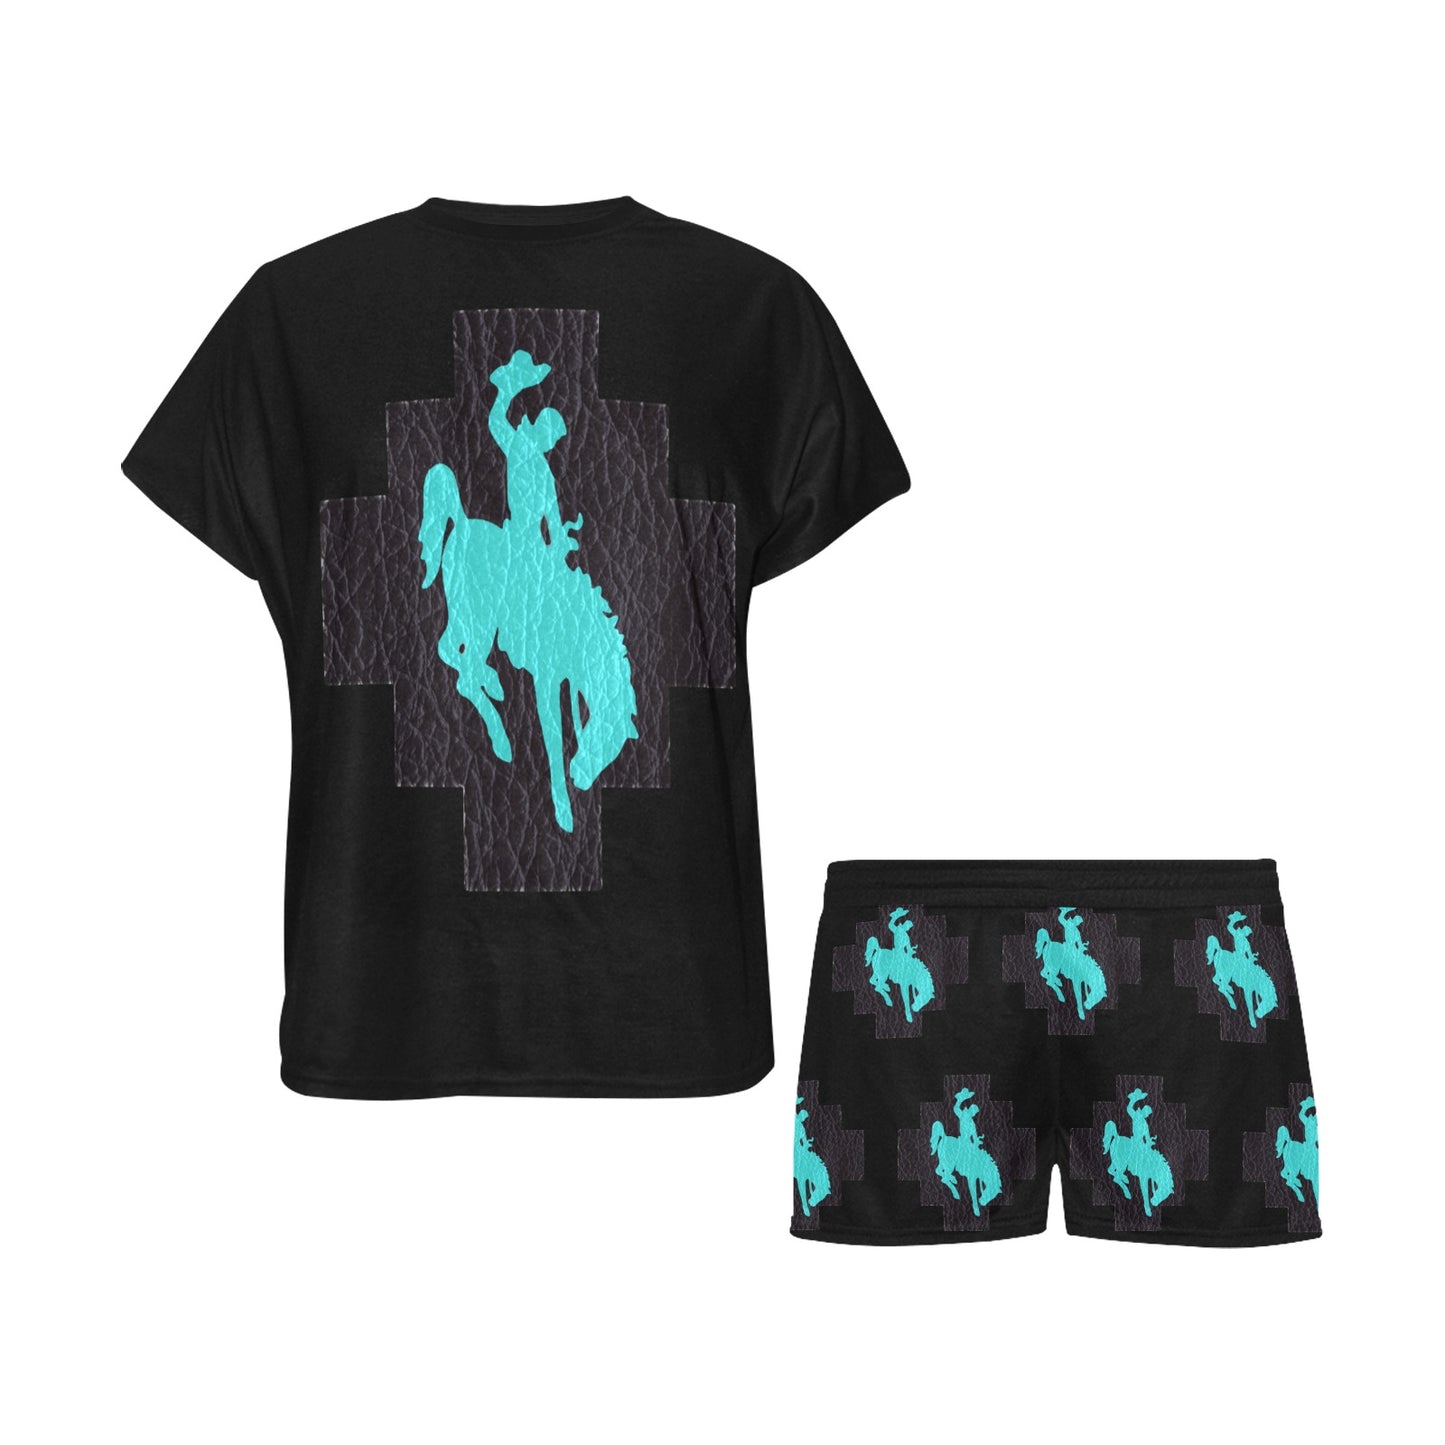 Turquoise Bronc & Leather Print Western Women's Top and Short Pajama Set